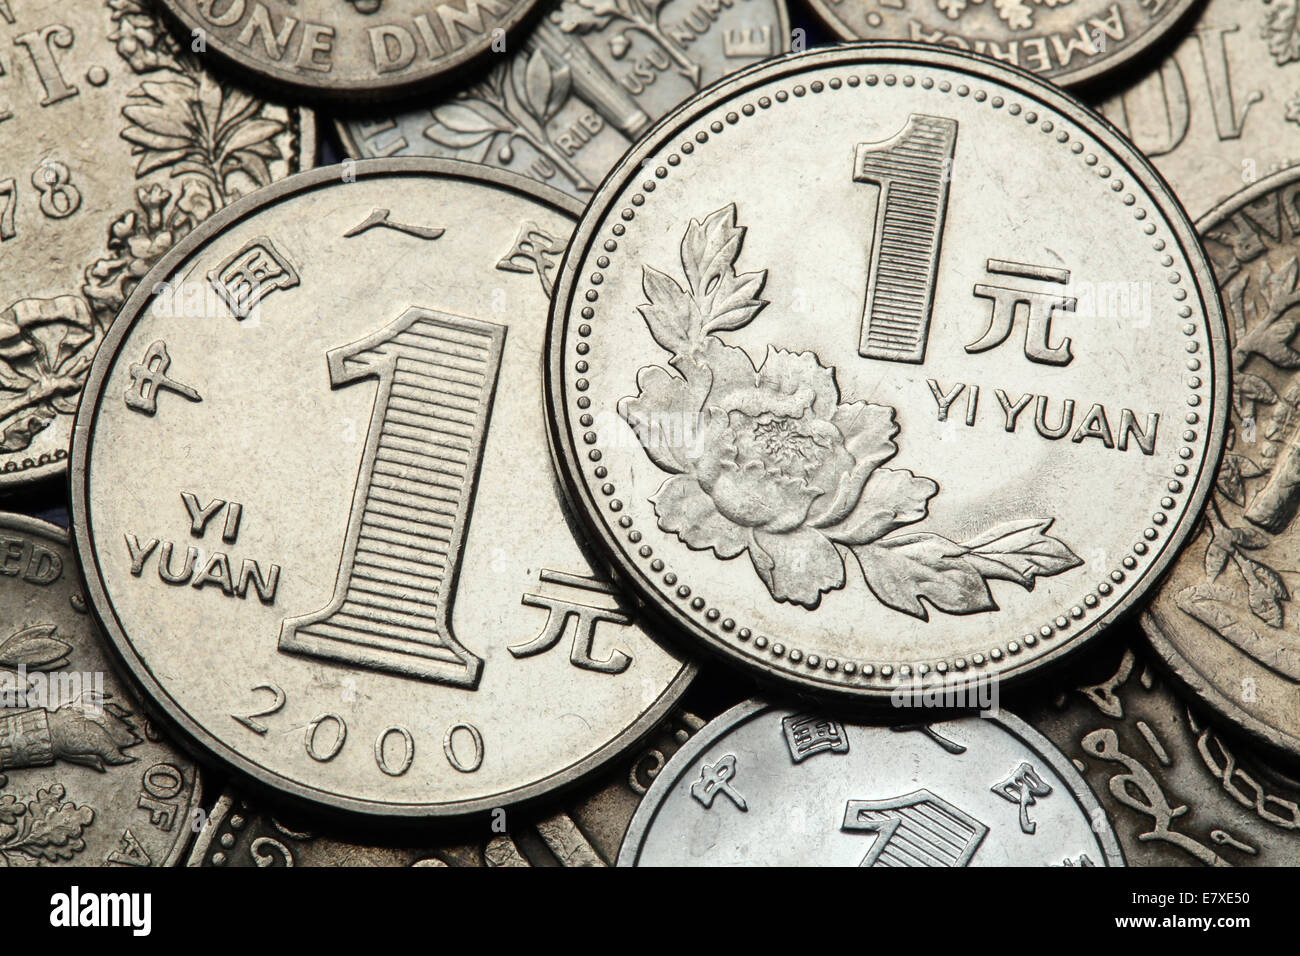 Coins of China. Peony flower depicted in the Chinese one Yuan coin. Stock Photo